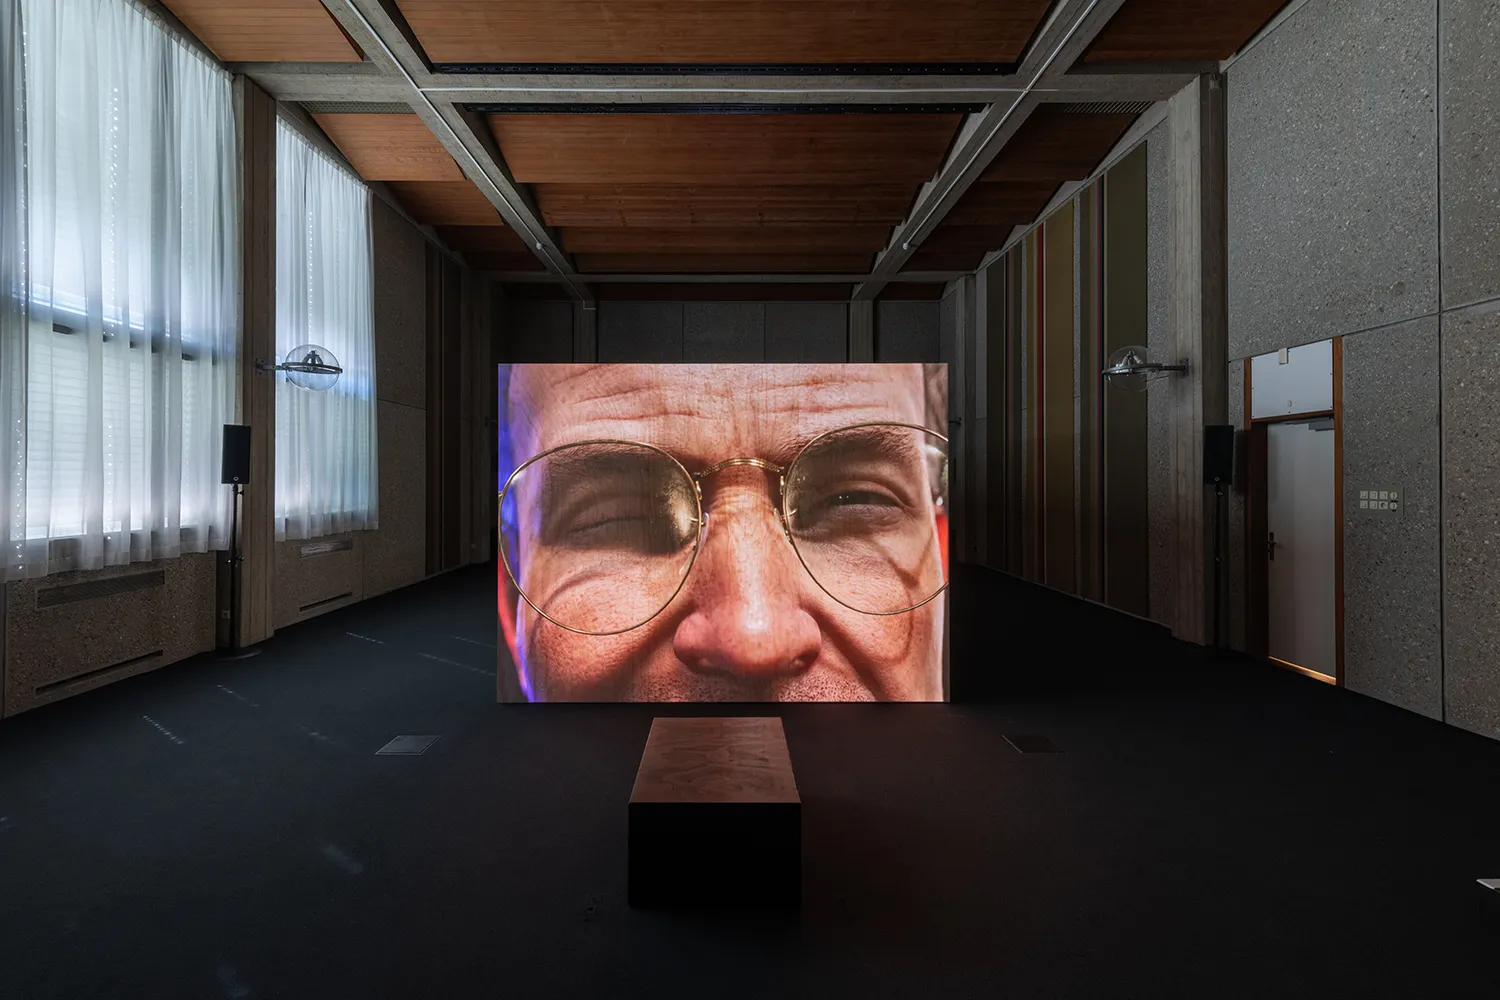 Projection of a close up digital character on a wooden box in a former courtroom